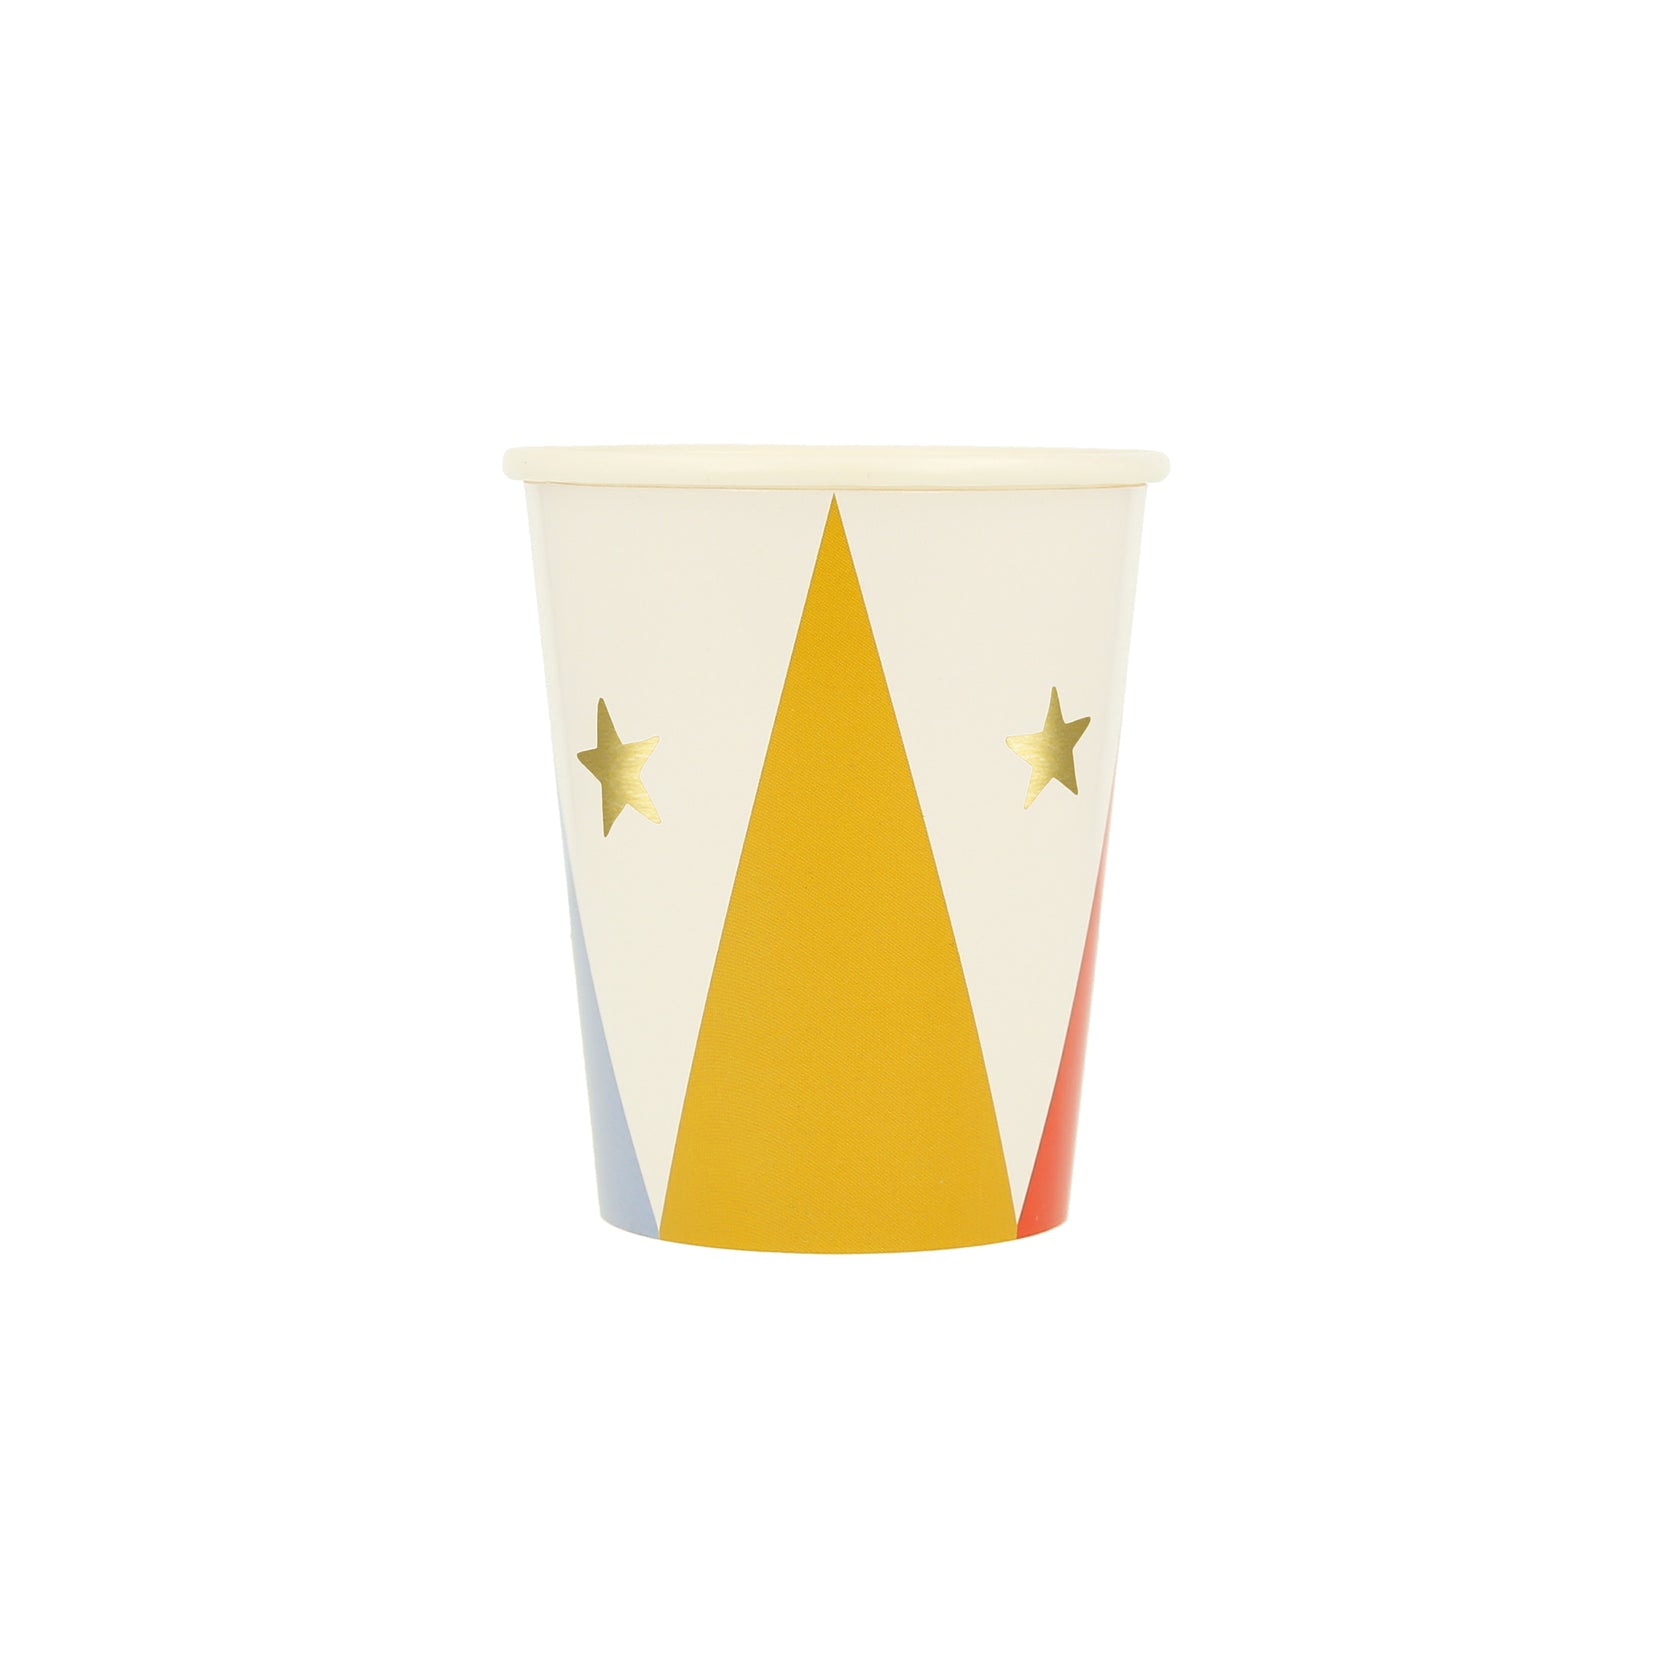 A collection of nine Meri Meri Circus Cups with geometric shapes, shiny gold foil details, and star patterns on a white background.